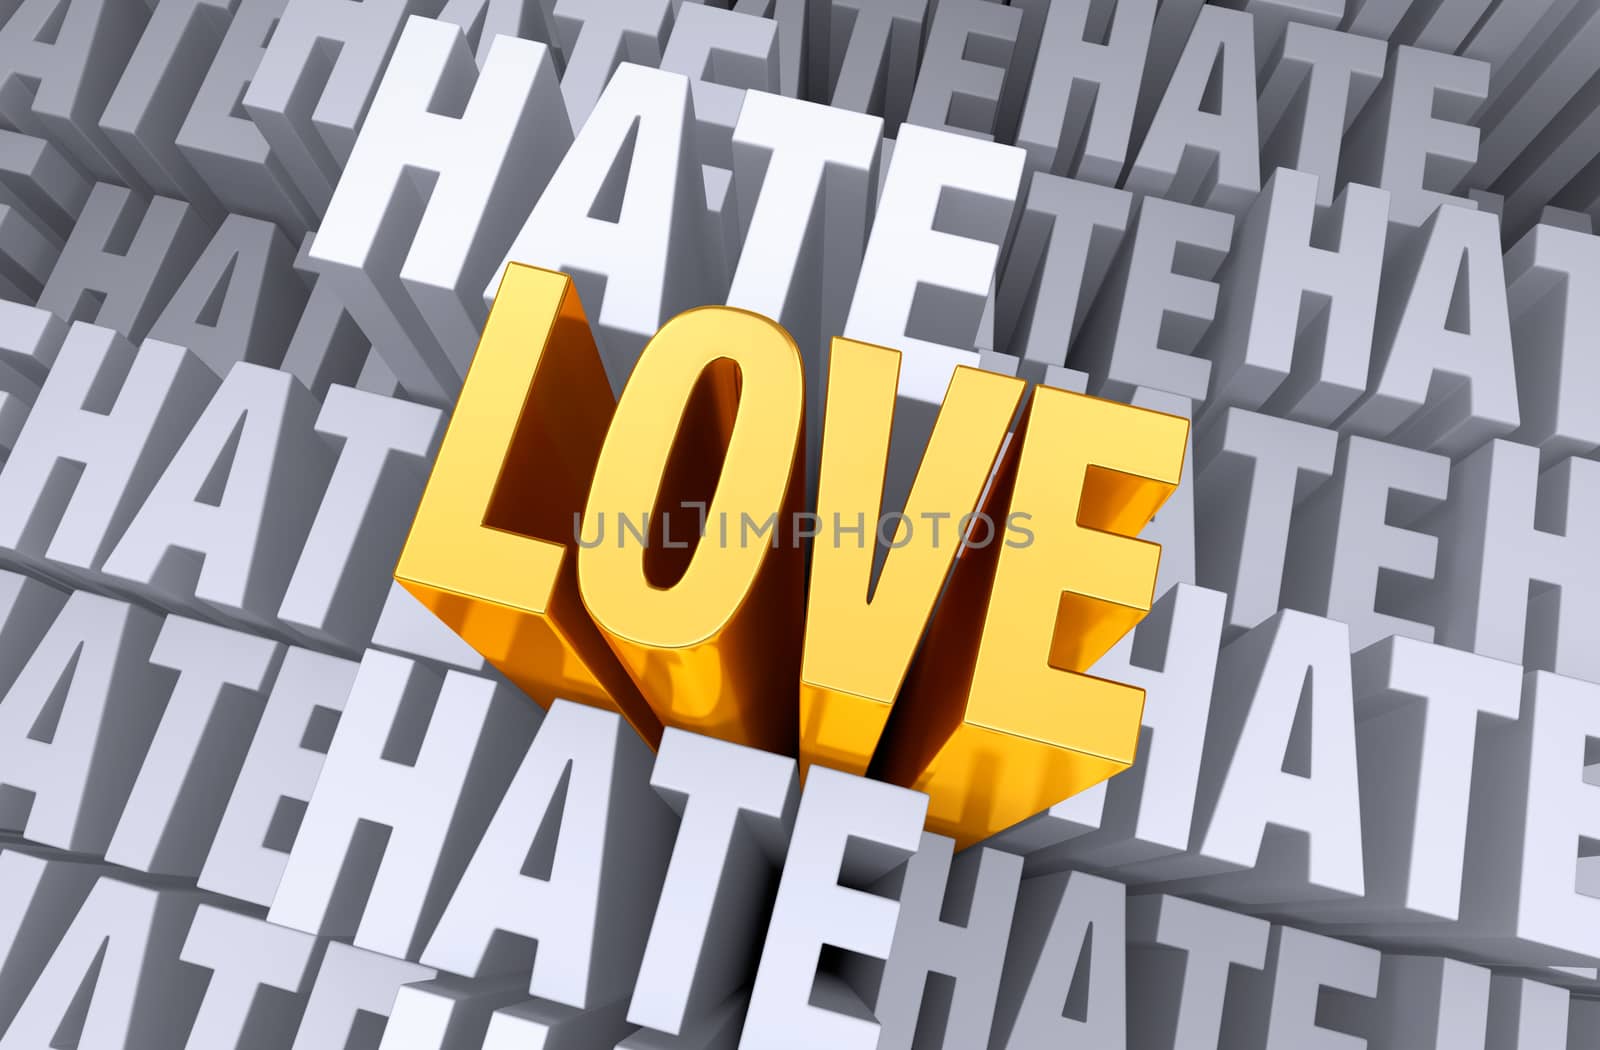 A bright, gold "LOVE" shines and rises above a background gray "HATE".